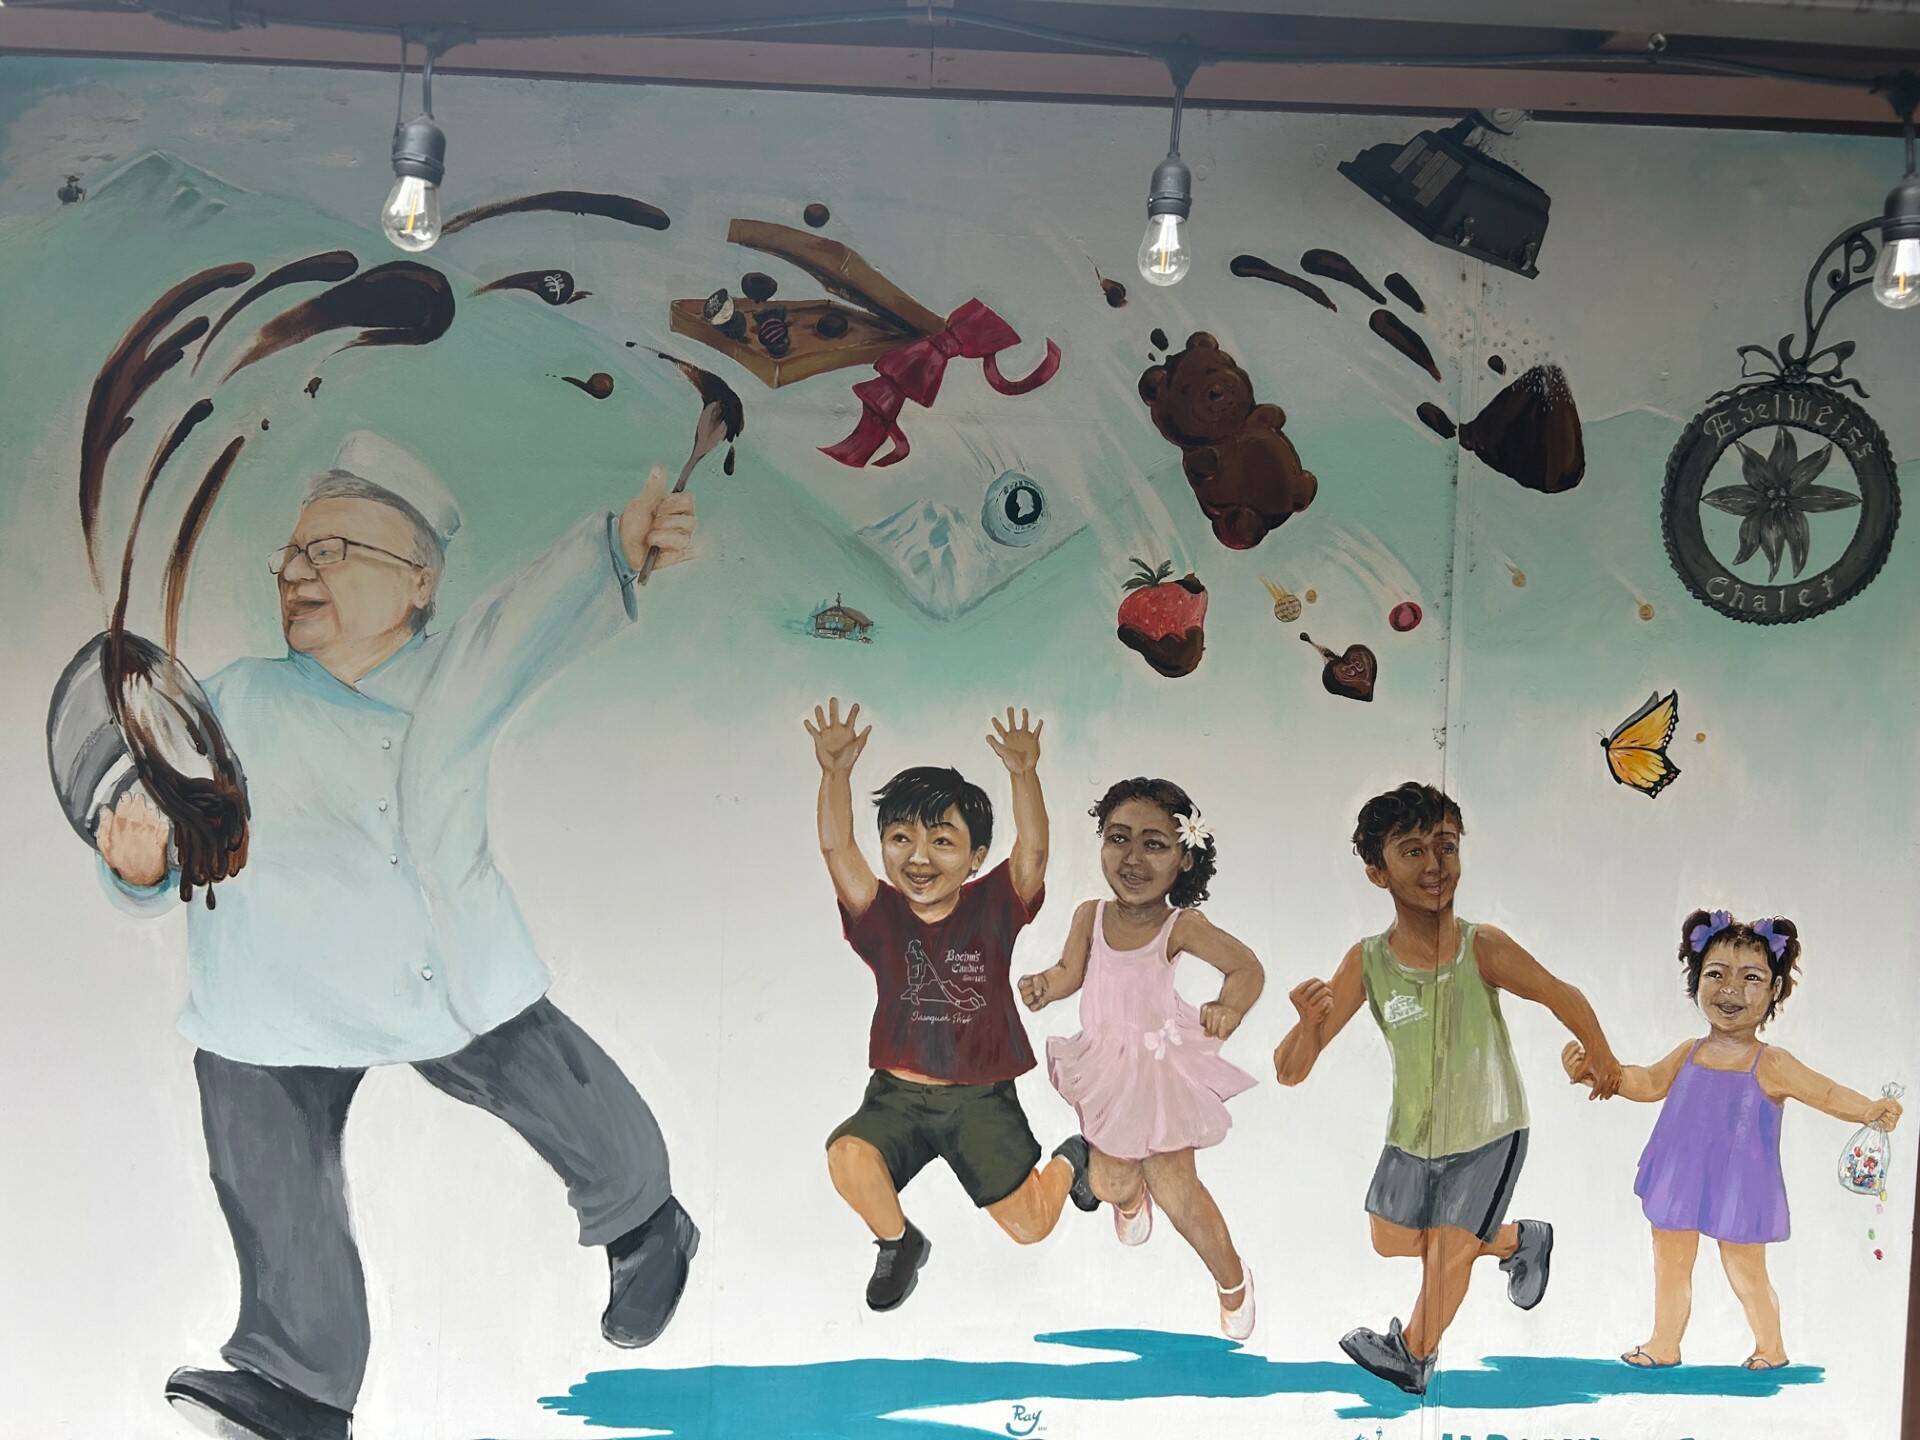 A mural of Bernard and his grandchildren is painted outside of the shop. (Photo by Cameron Sires/Sound Publishing)